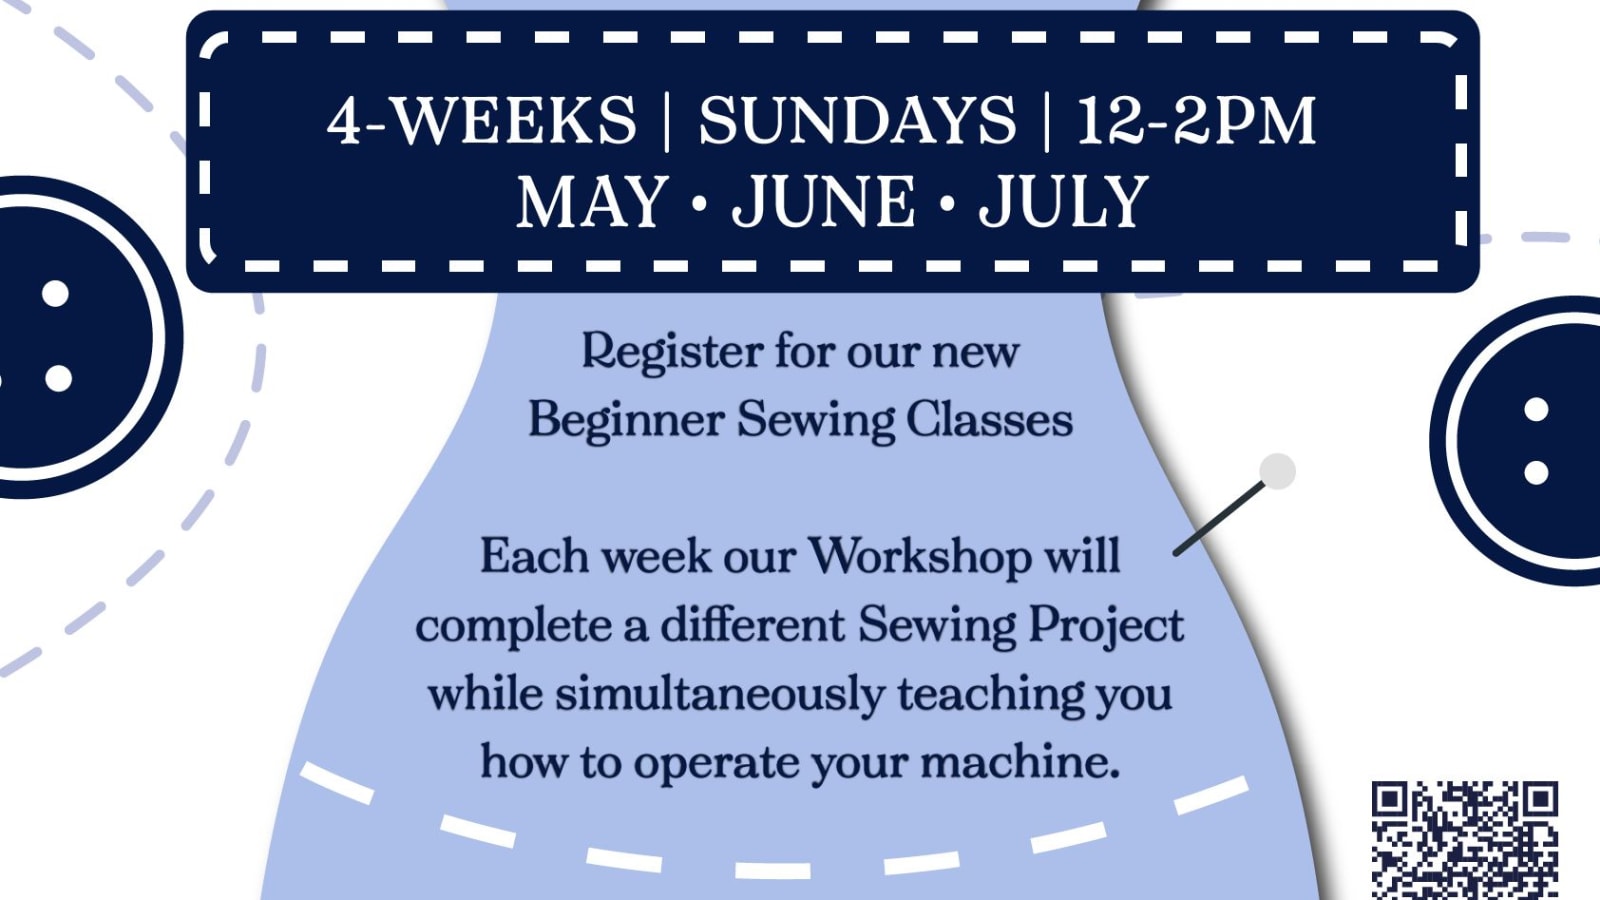 Sewing 101 | Learn to Sew | In-Person Beginner Sew